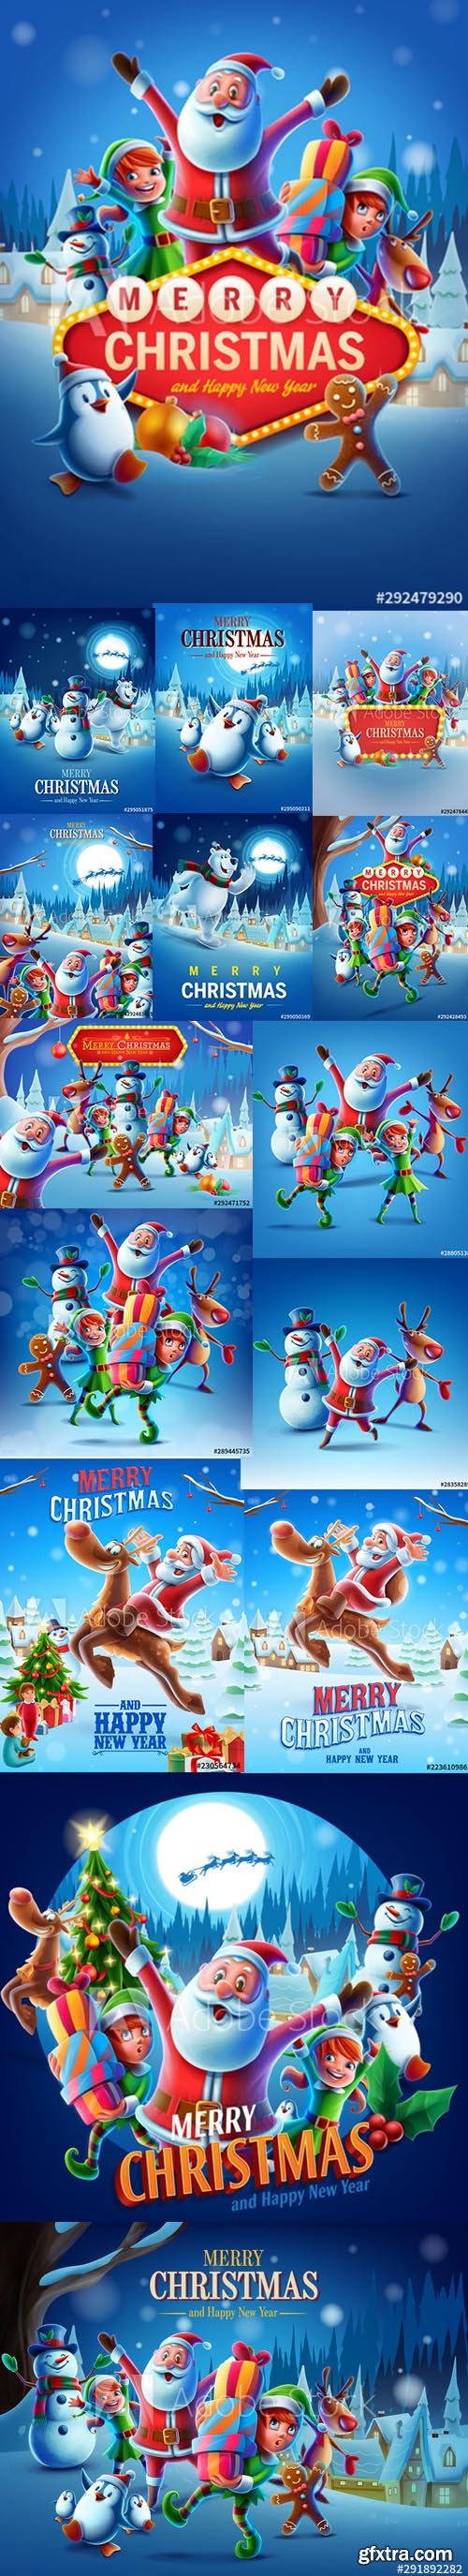 Vector Set - Christmas Illustrations with Santa Claus and Reindeer